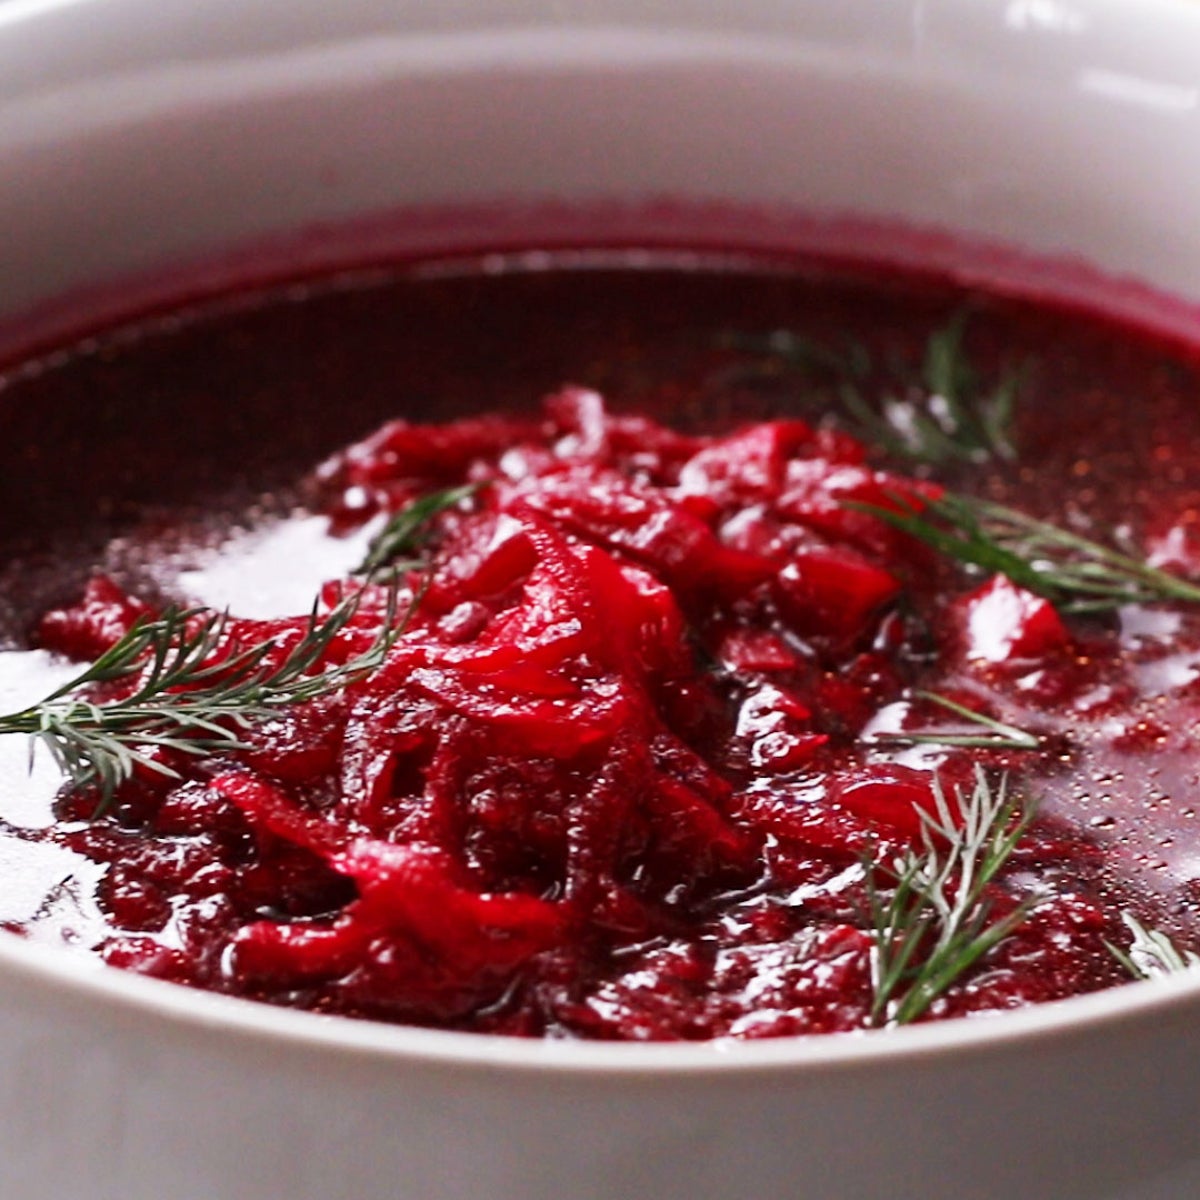 Beet Soup with Cheese Balls recipe